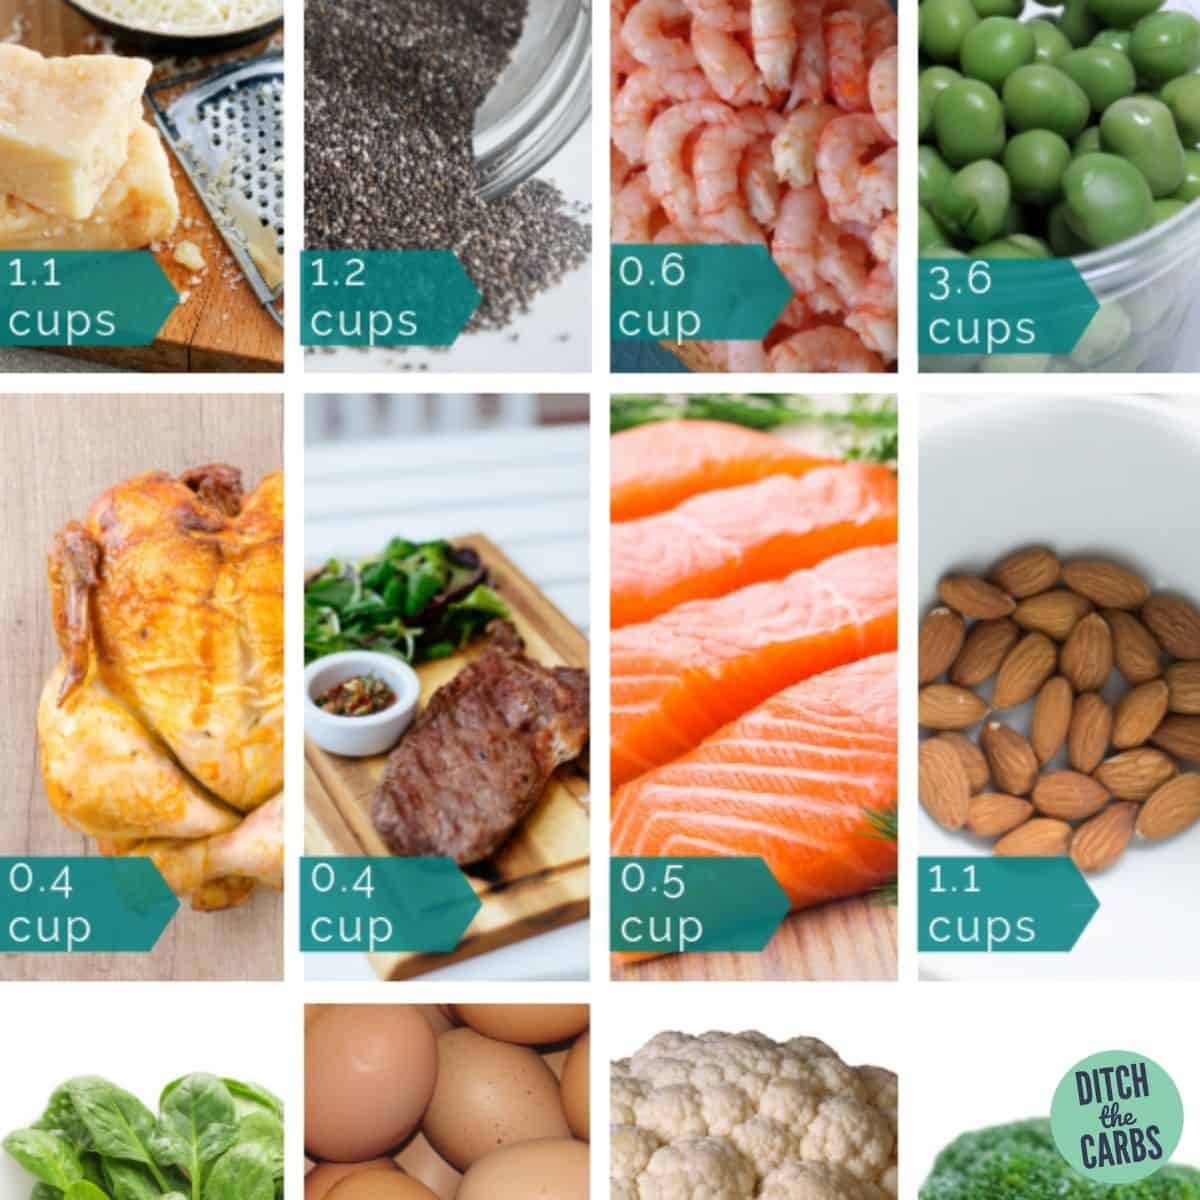 Easy Portion Control (What does 30g protein look like?) + PROTEIN CHARTS